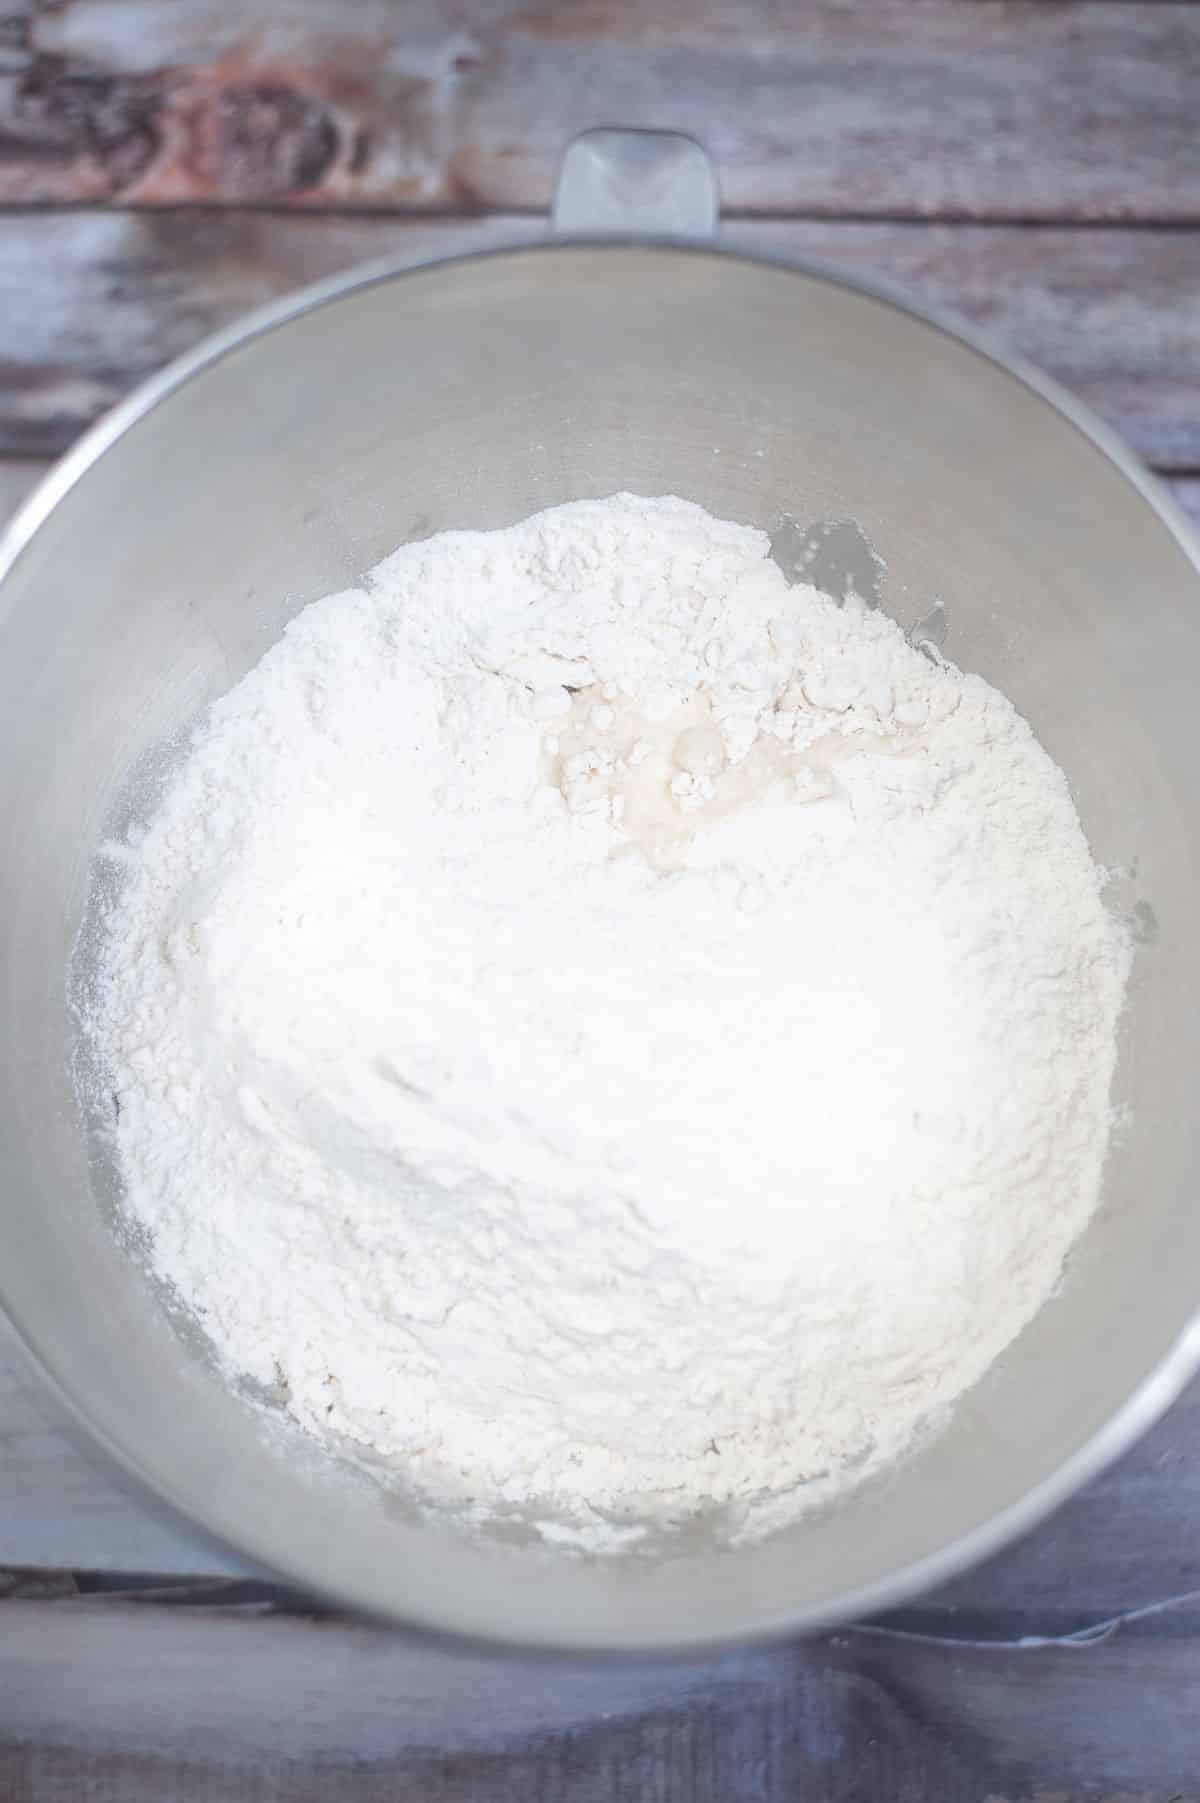 Yeast mixture, salt and flour in a mixing bowl.